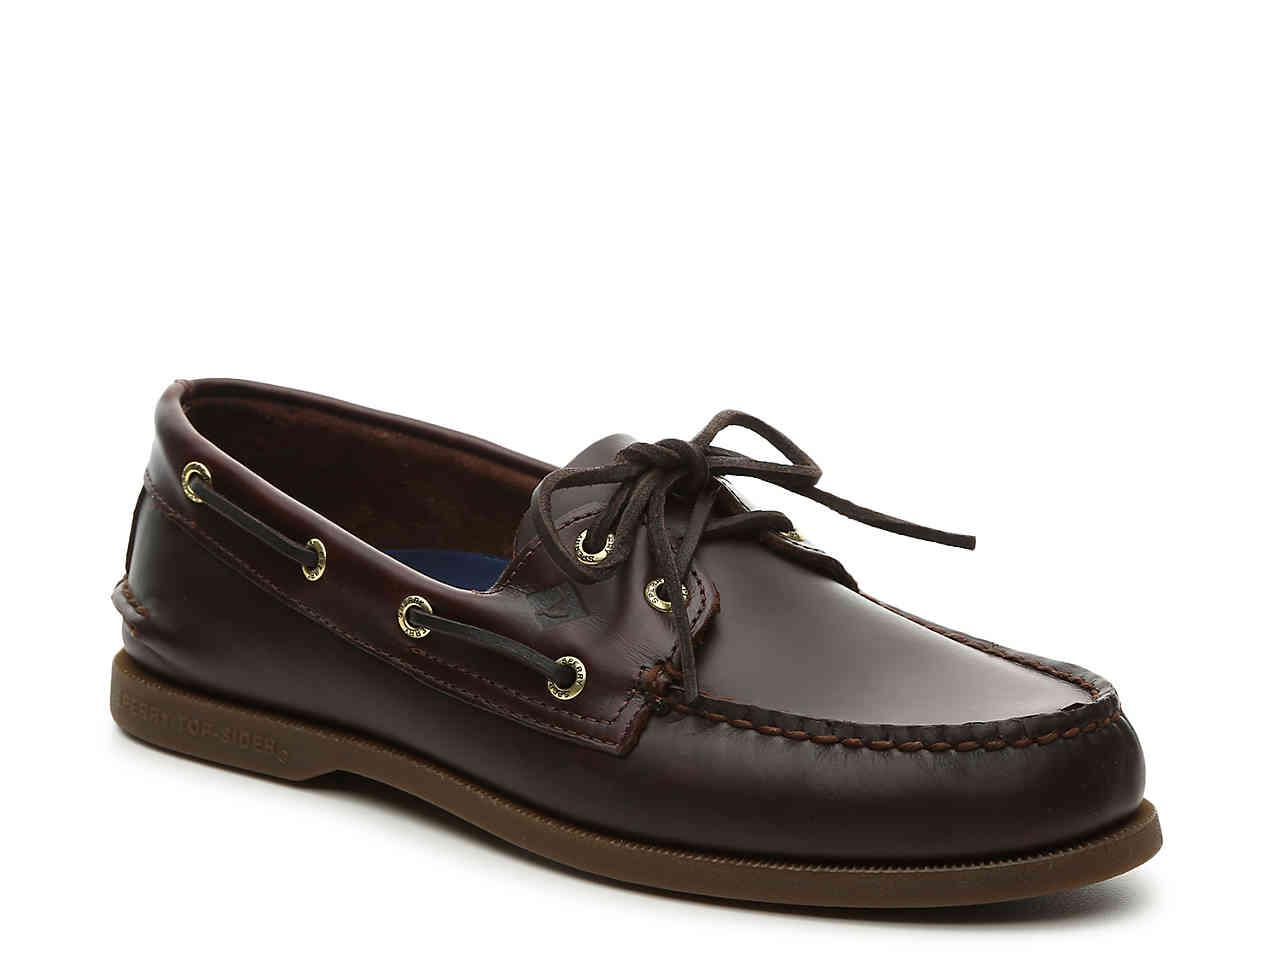 Sperry Top-Sider Leather A/o Amaretto Boat Shoe in Dark Brown (Brown ...